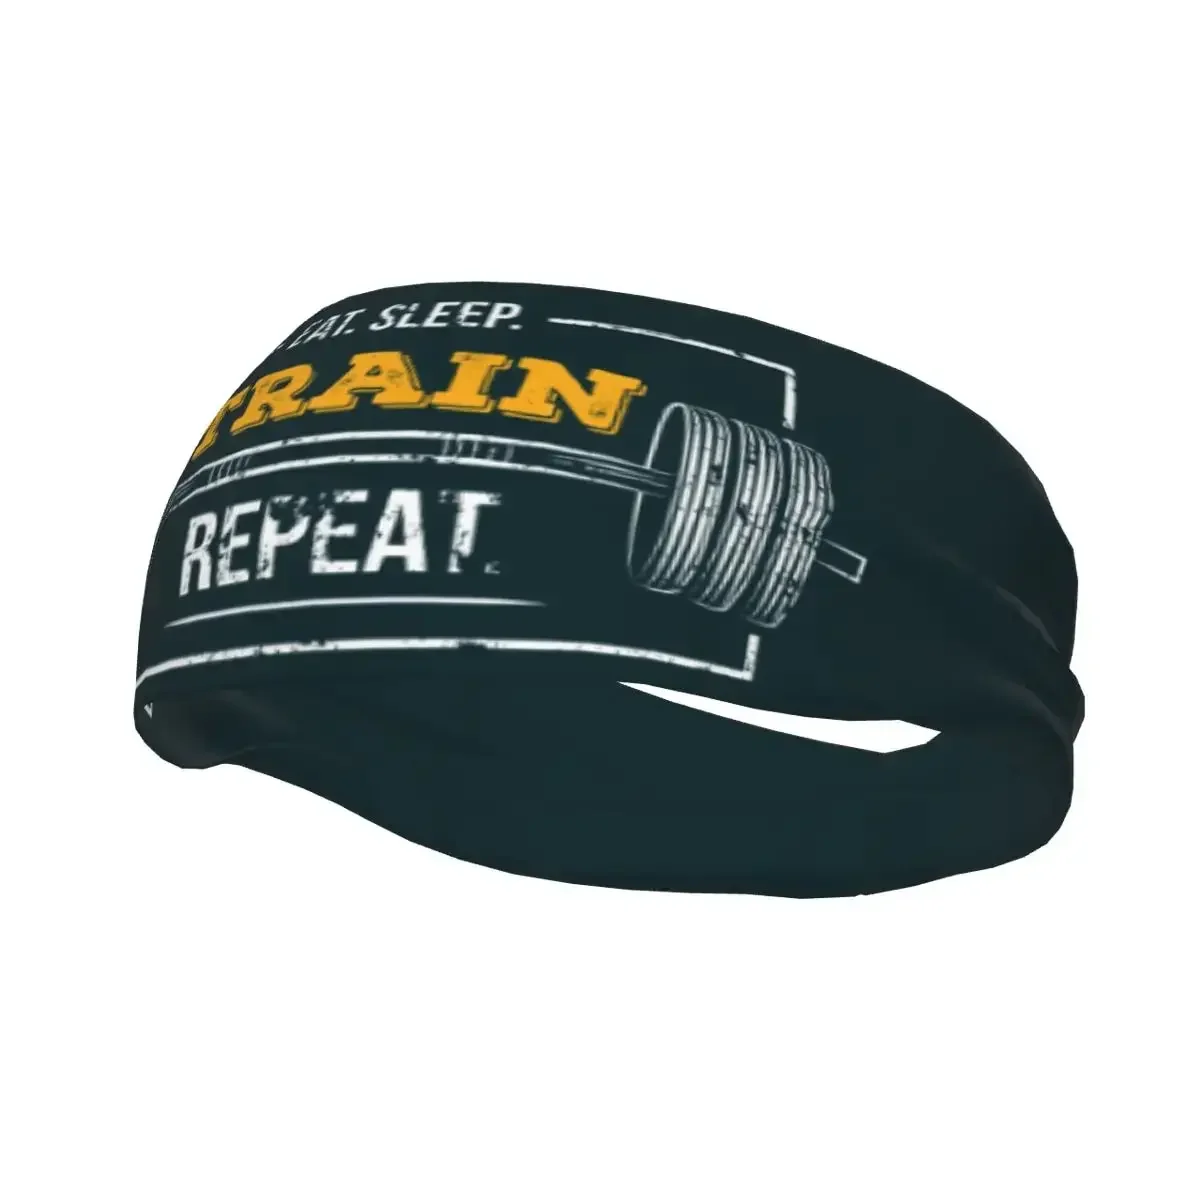 

Eat Sleep Train Repeat Gym Motivational Quote Sports Sweatbands for Cycling Bodybuilding Workout Quick Drying Headband Women Men